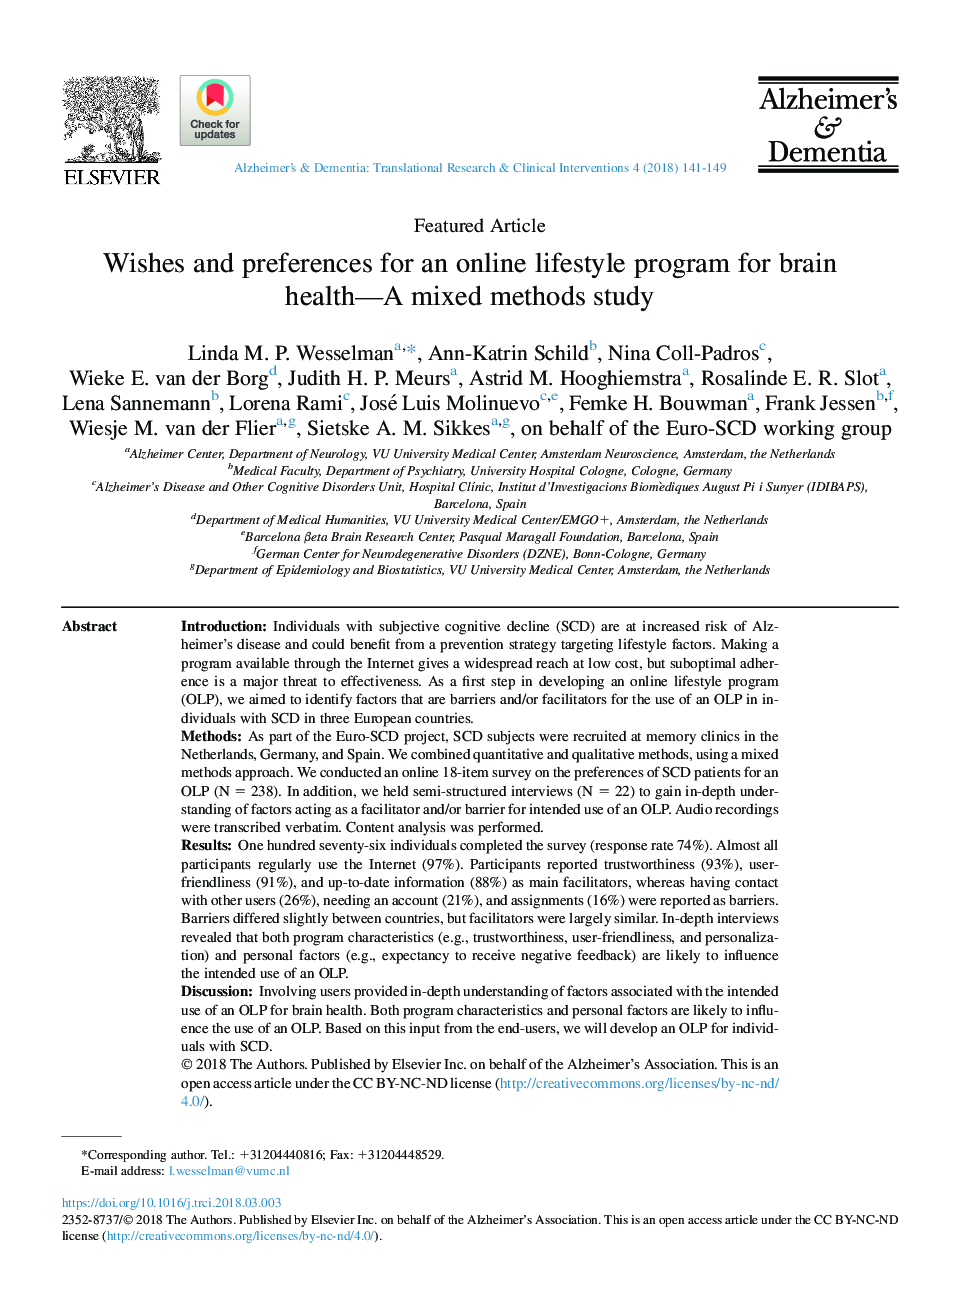 Wishes and preferences for an online lifestyle program for brain health-A mixed methods study